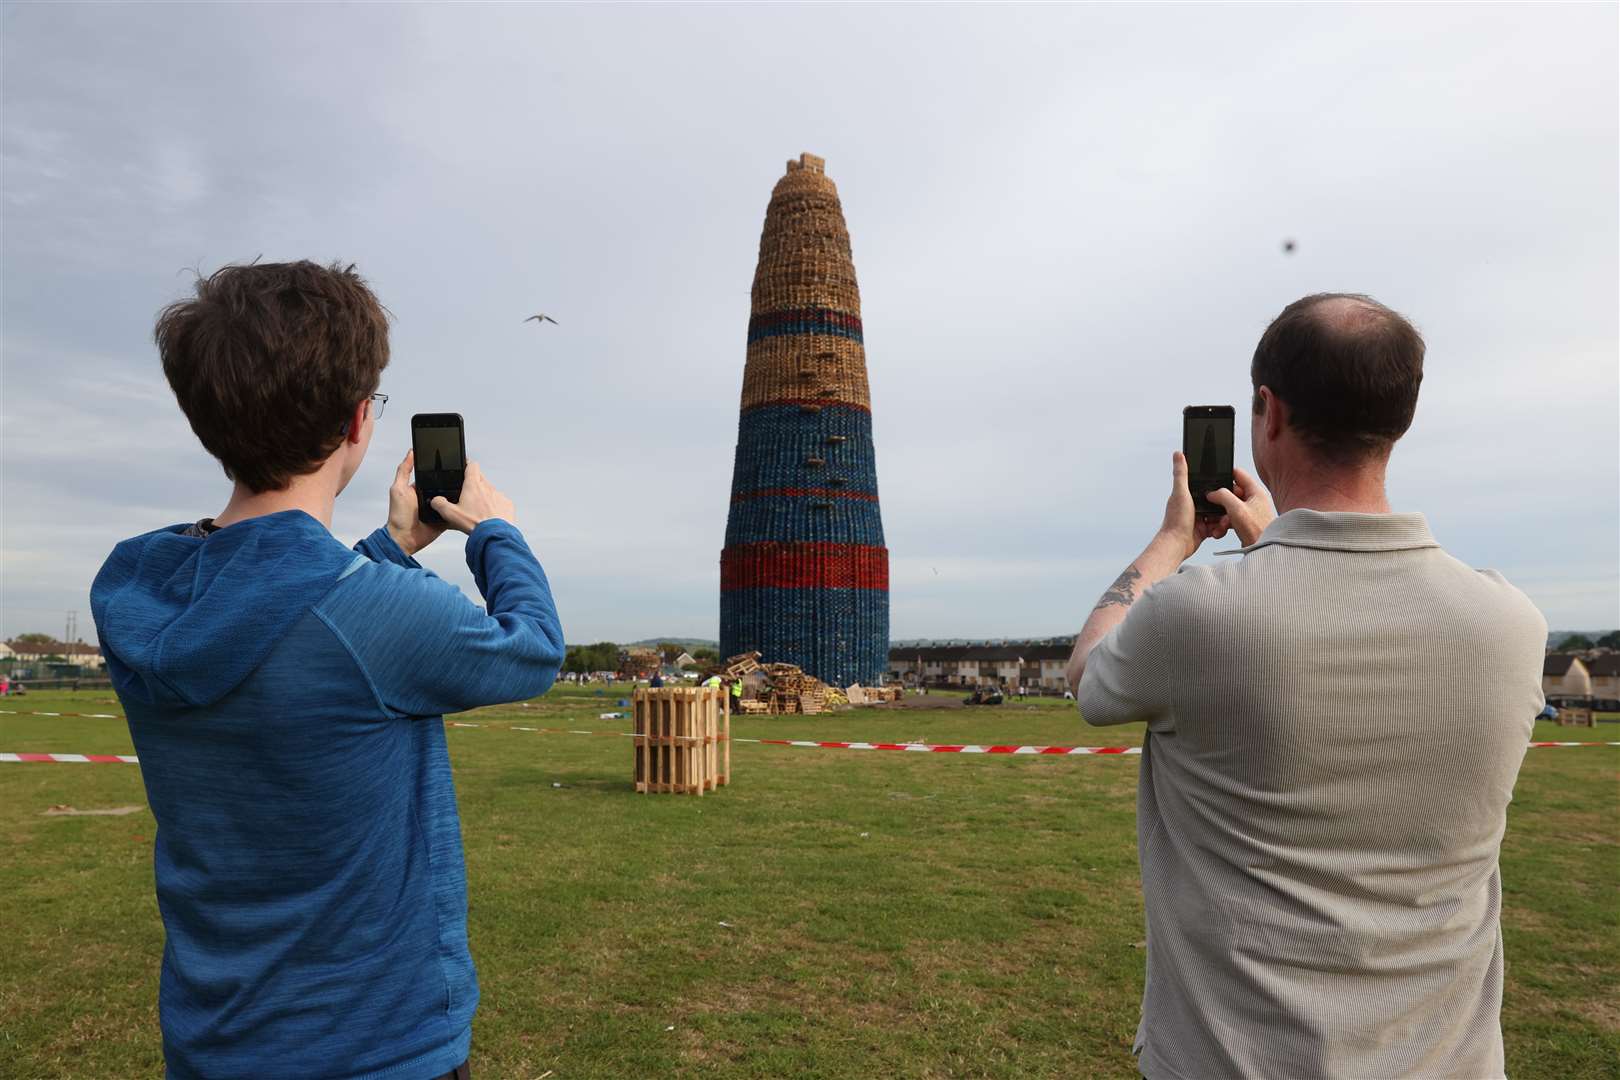 People take pictures of the Craigyhill bonfire in Larne, prior to it being lit on the ‘Eleventh night’ to usher in the Twelfth commemorations (Liam McBurney/PA)